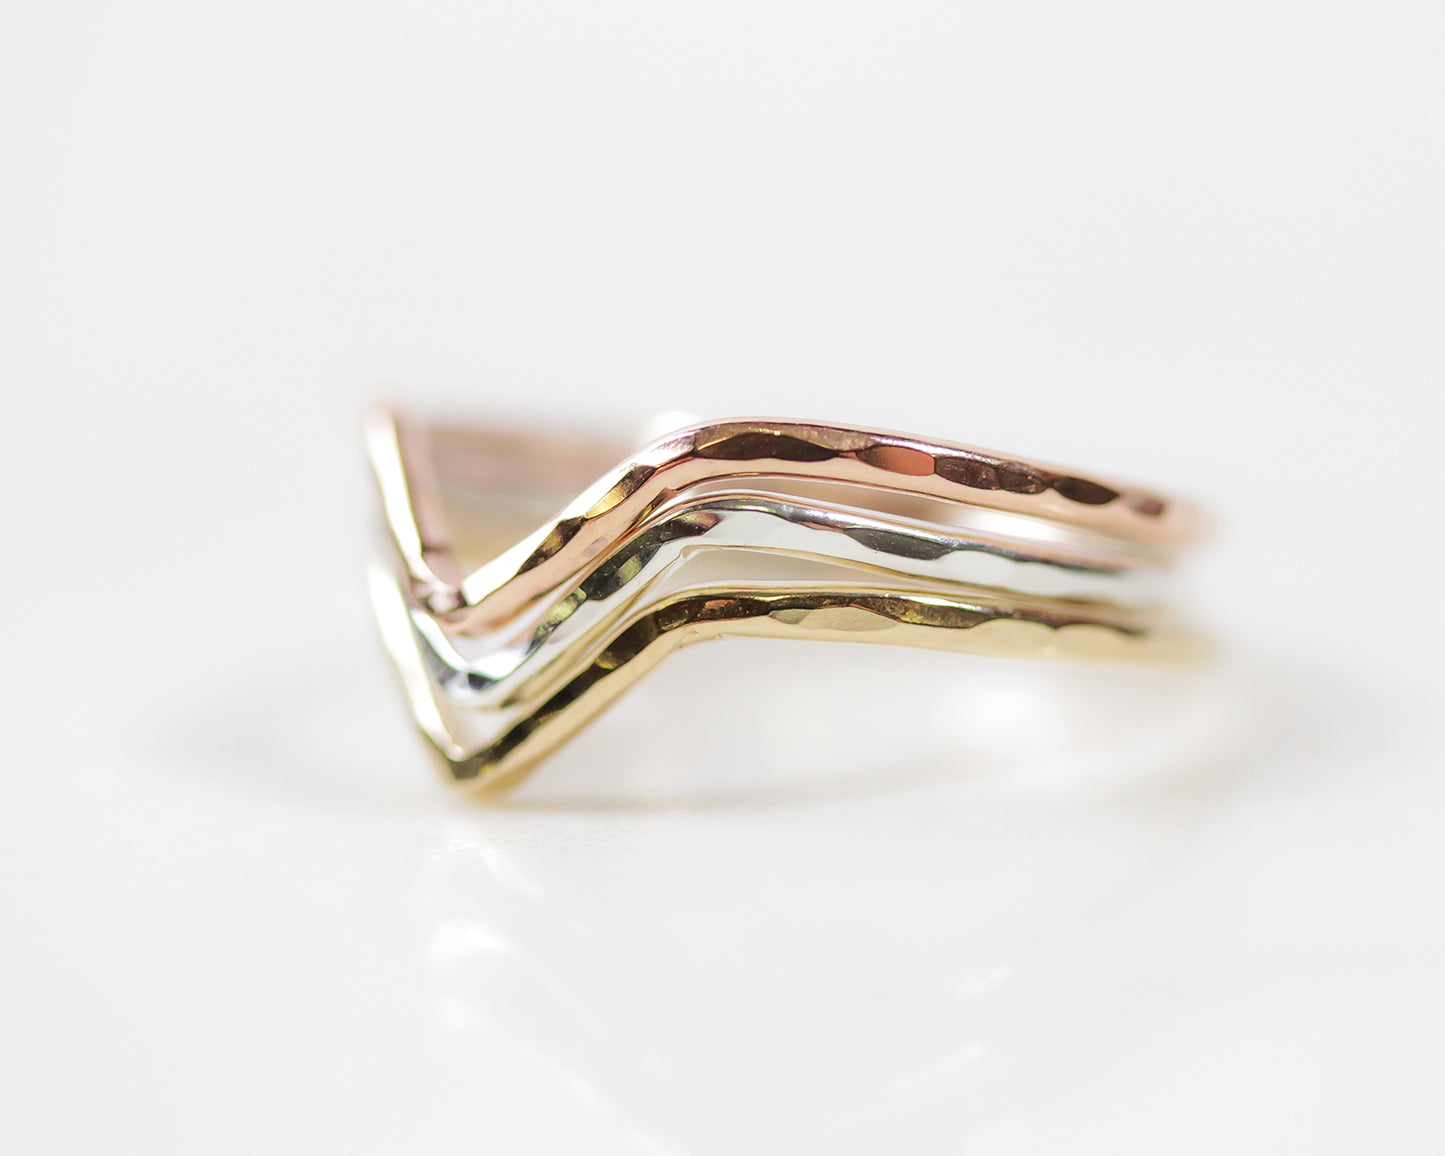 This minimalist V shaped ring is strong, bold, delicate and wearable. Image shows close up of the Chevron Ring in all metal selects, rose and gold fill and sterling. It shows the side of the band&#39;s hand hammered technique that makes it sparkle.